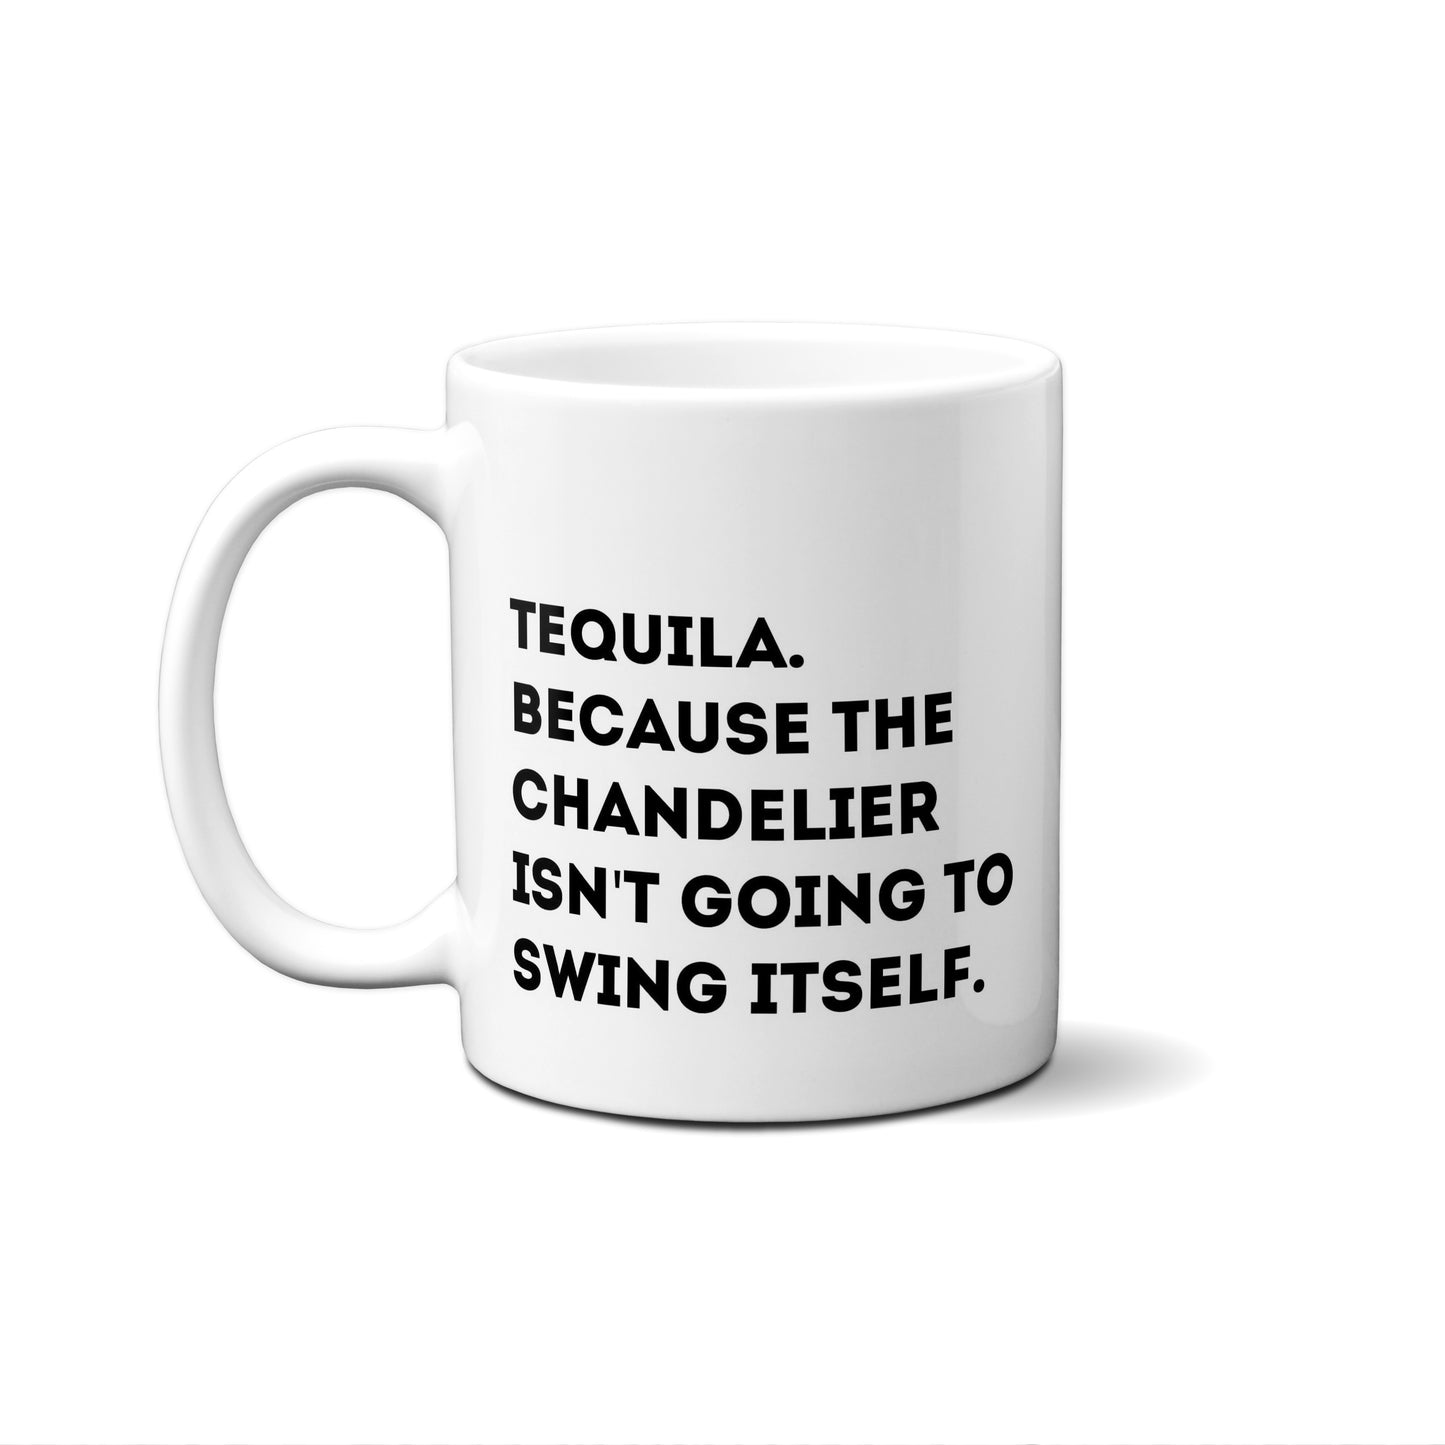 Tequila Because The Chandelier Isn't Going To Swing Itself. Quote Mug